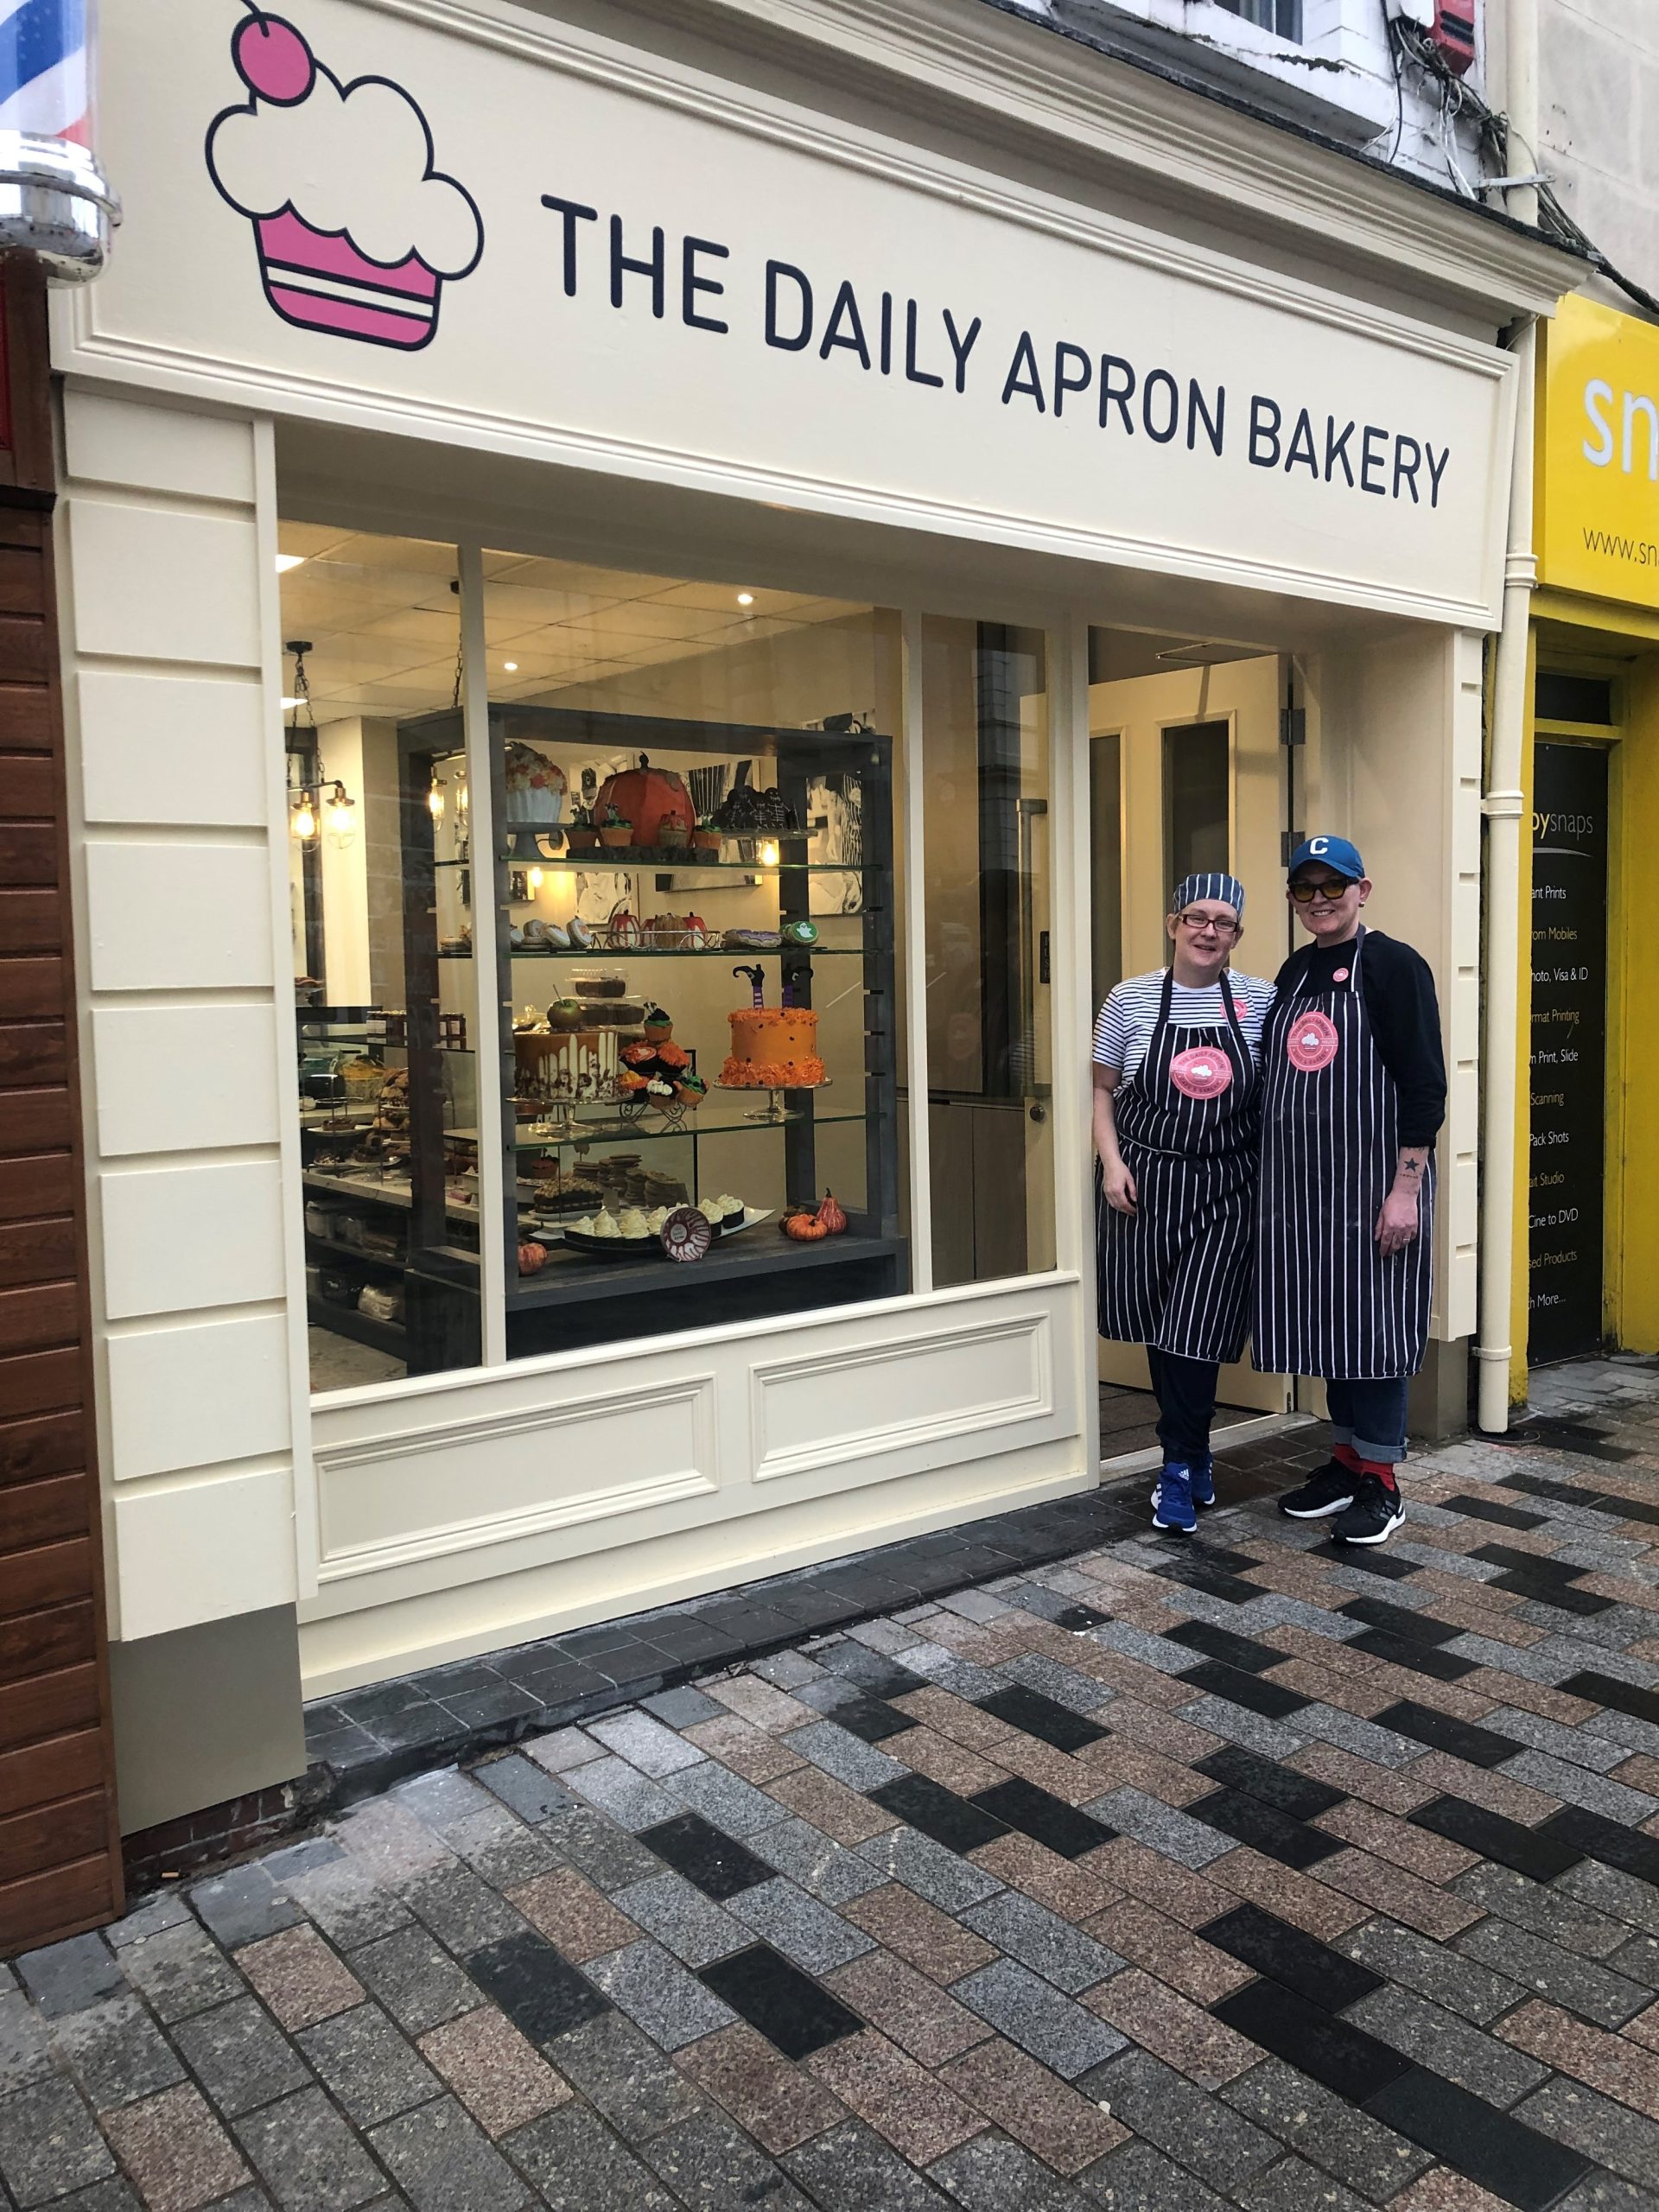 Daily Apron owners step back from café business to focus on bakery expansion